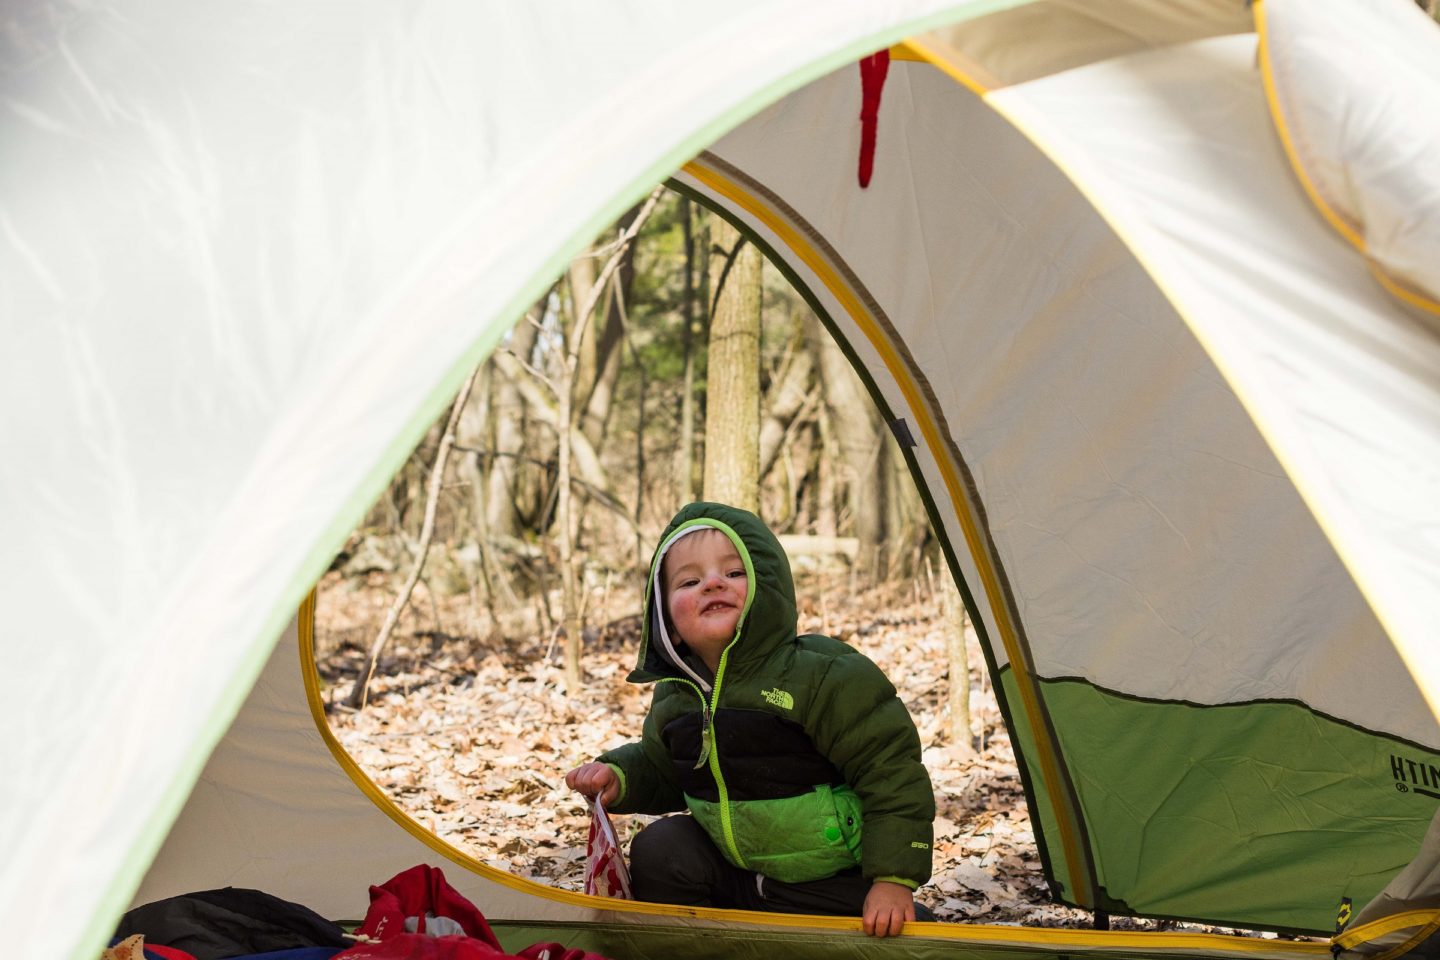 Cold weather camping by Lexie Gritlefeld for Hike it Baby